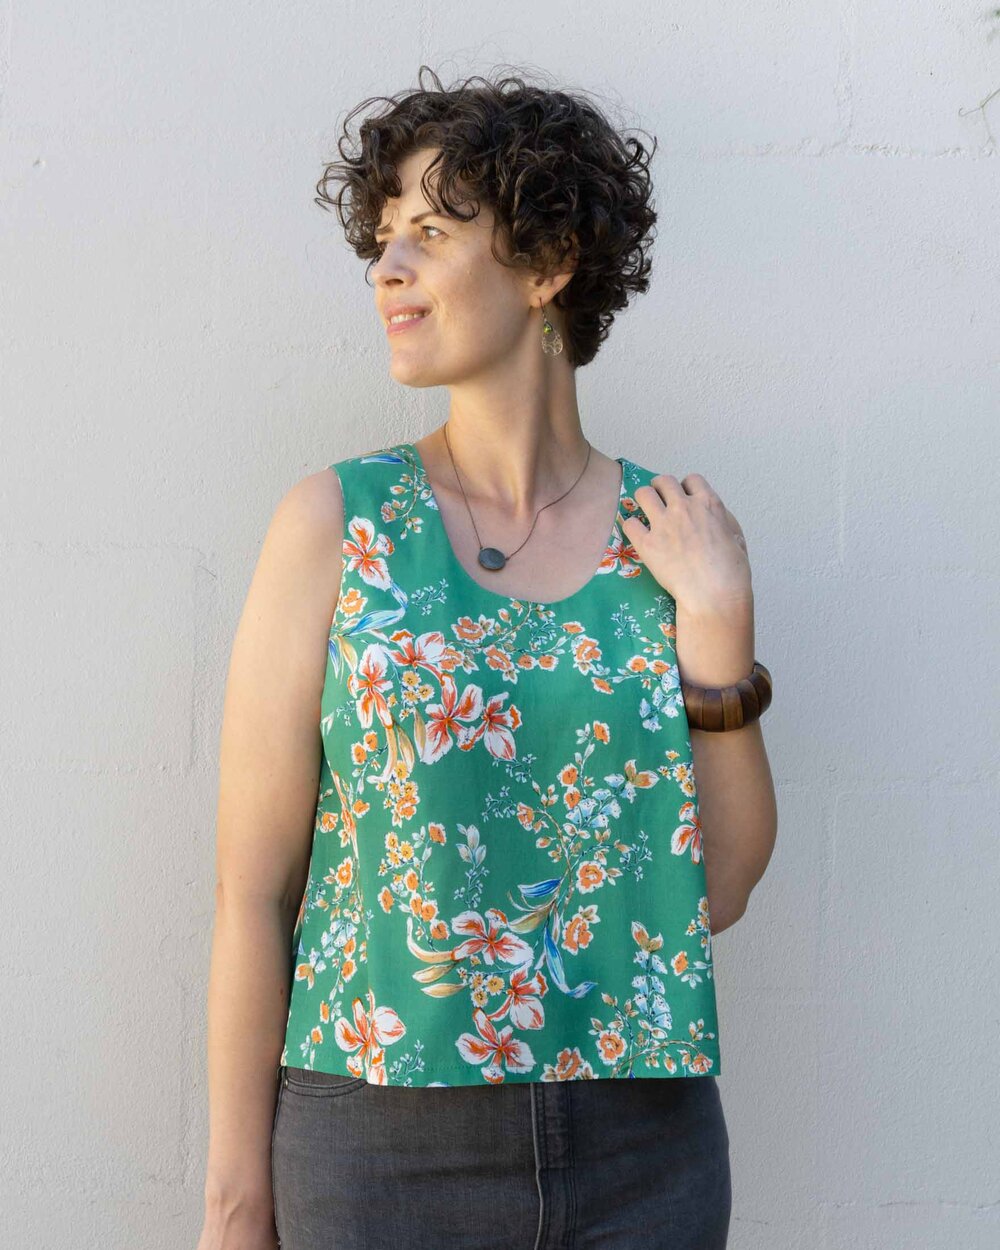 6+ Designs Ladies Stretch Tank Top Sewing Pattern - EoghannJoscelyn